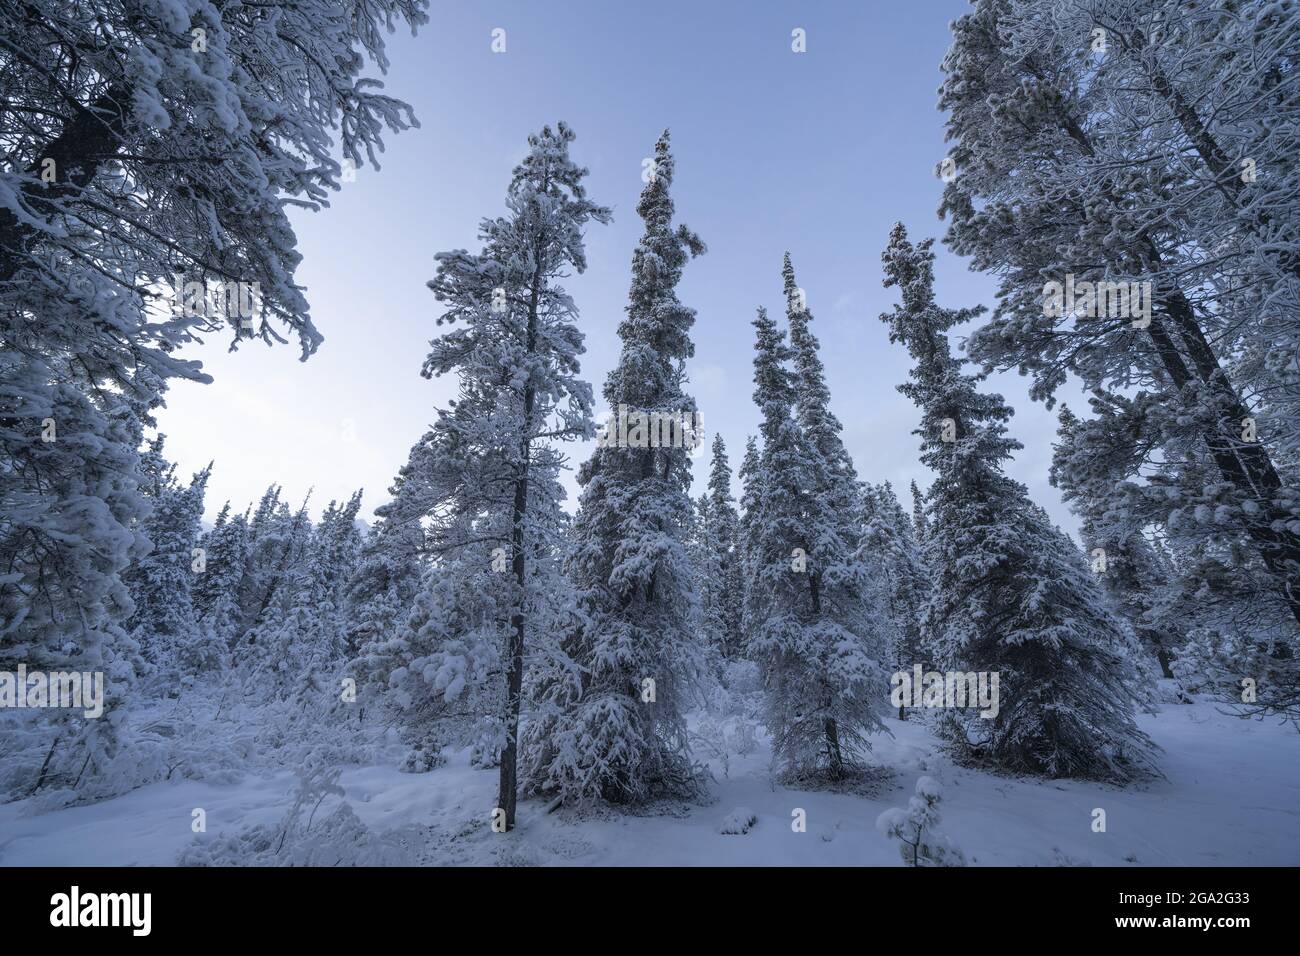 Snow covered conifers with a pale blue sky cast a cool light on the forest on a cold winter day; Whitehorse, Yukon, Canada Stock Photo